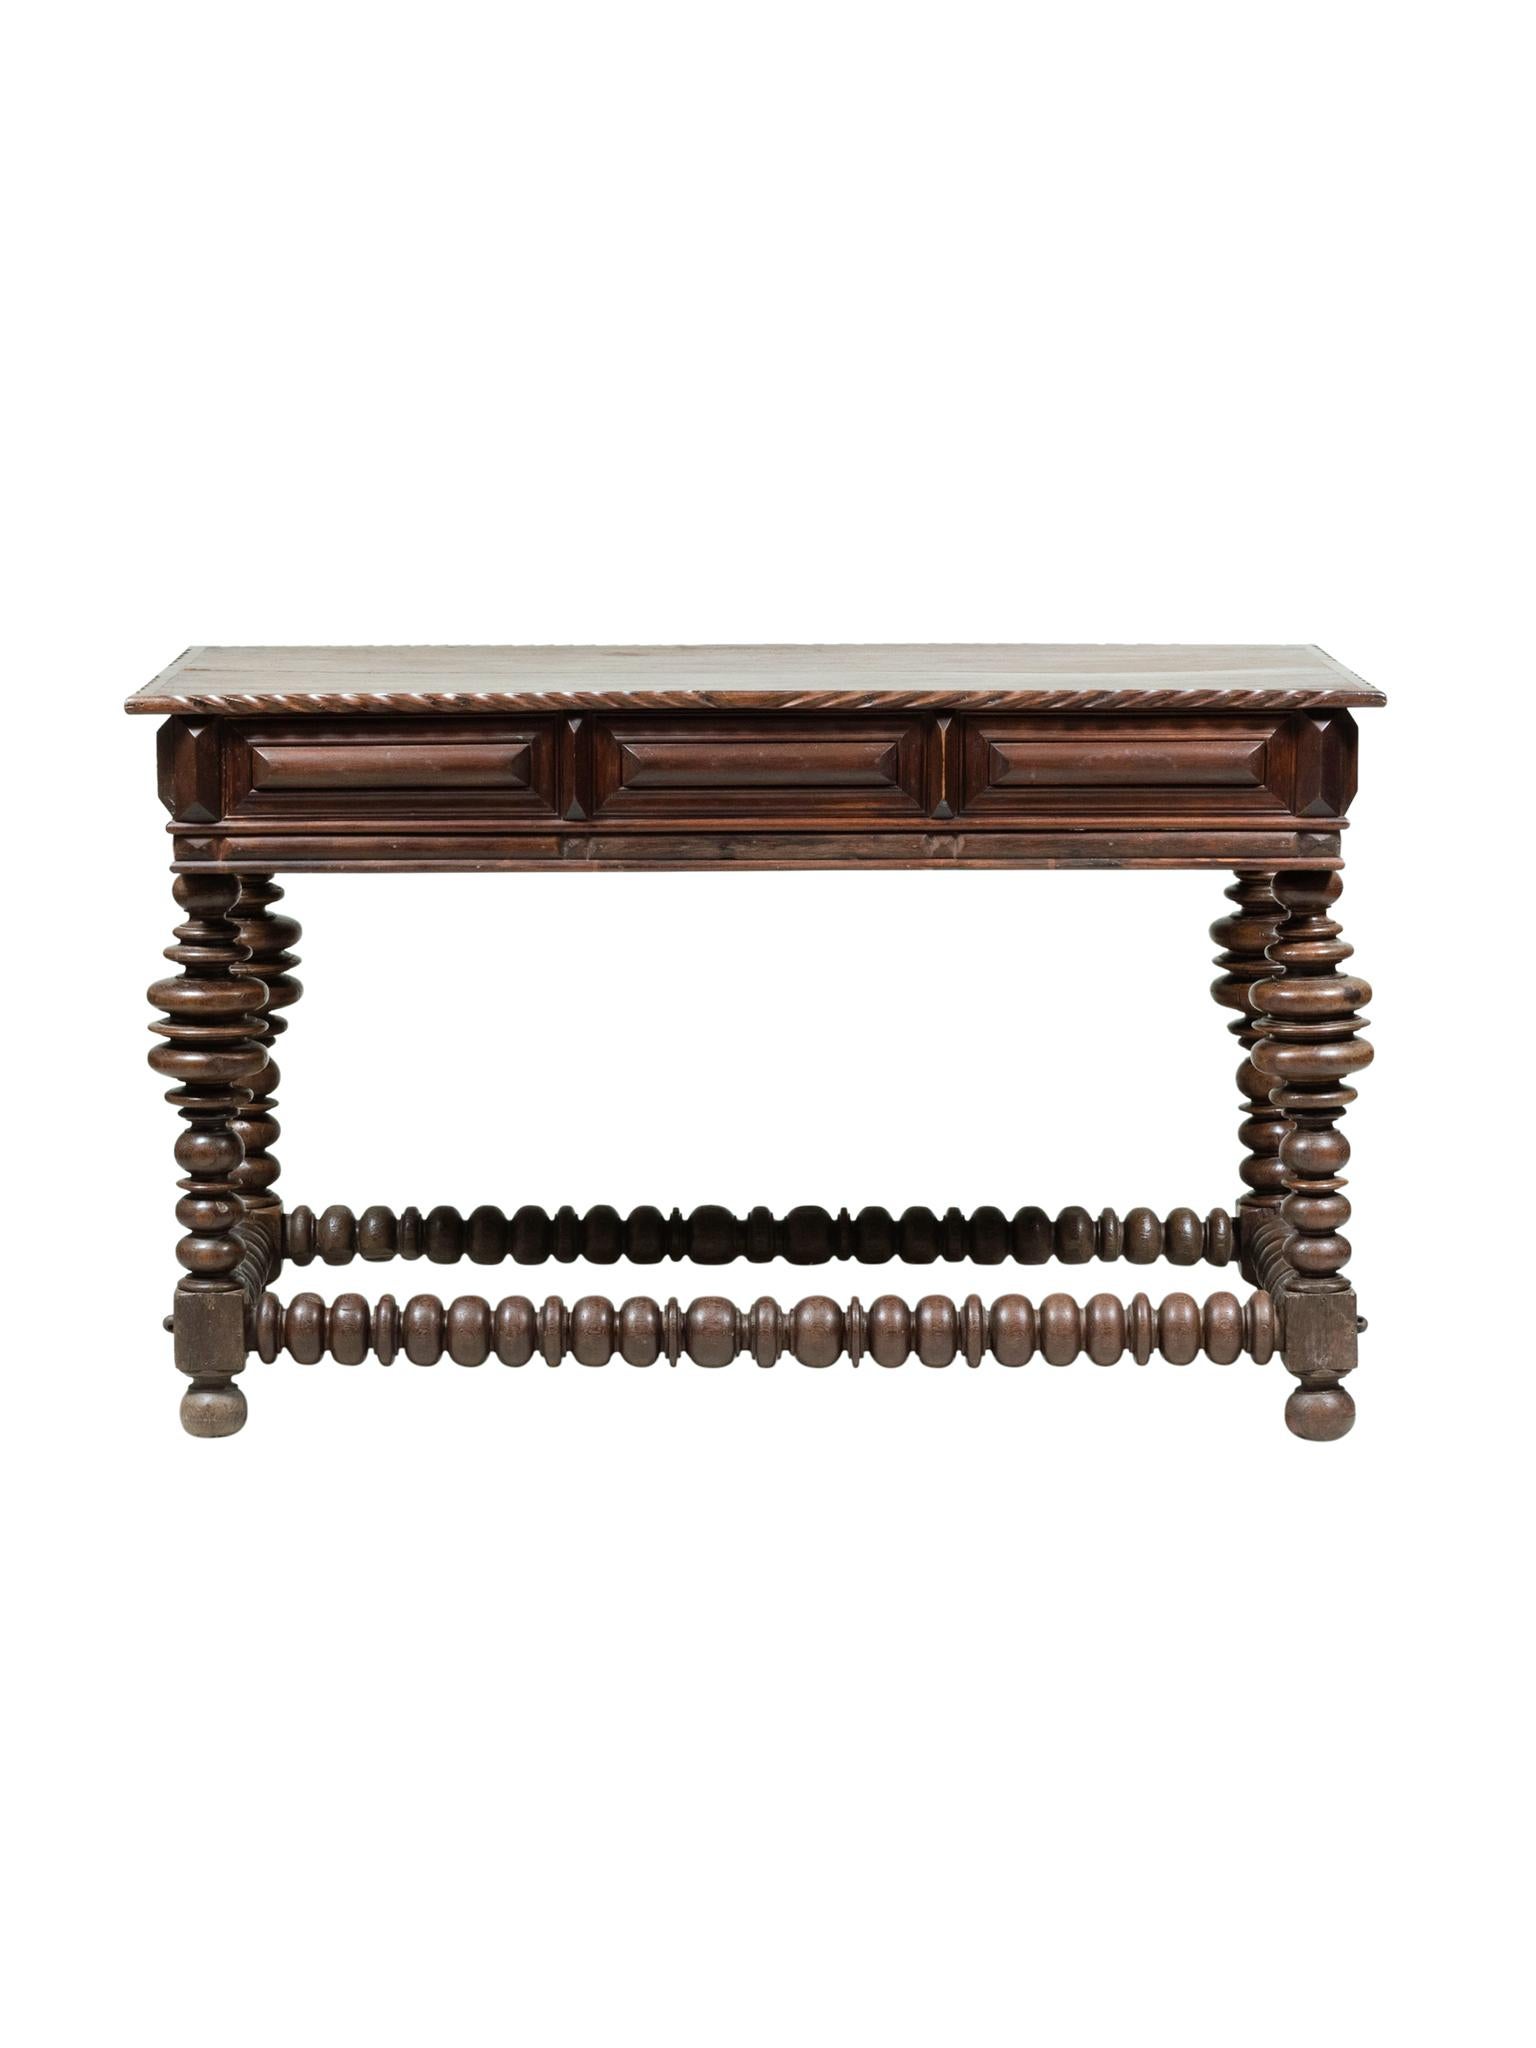 20th Century Baroque-Style Portuguese Rosewood Table For Sale